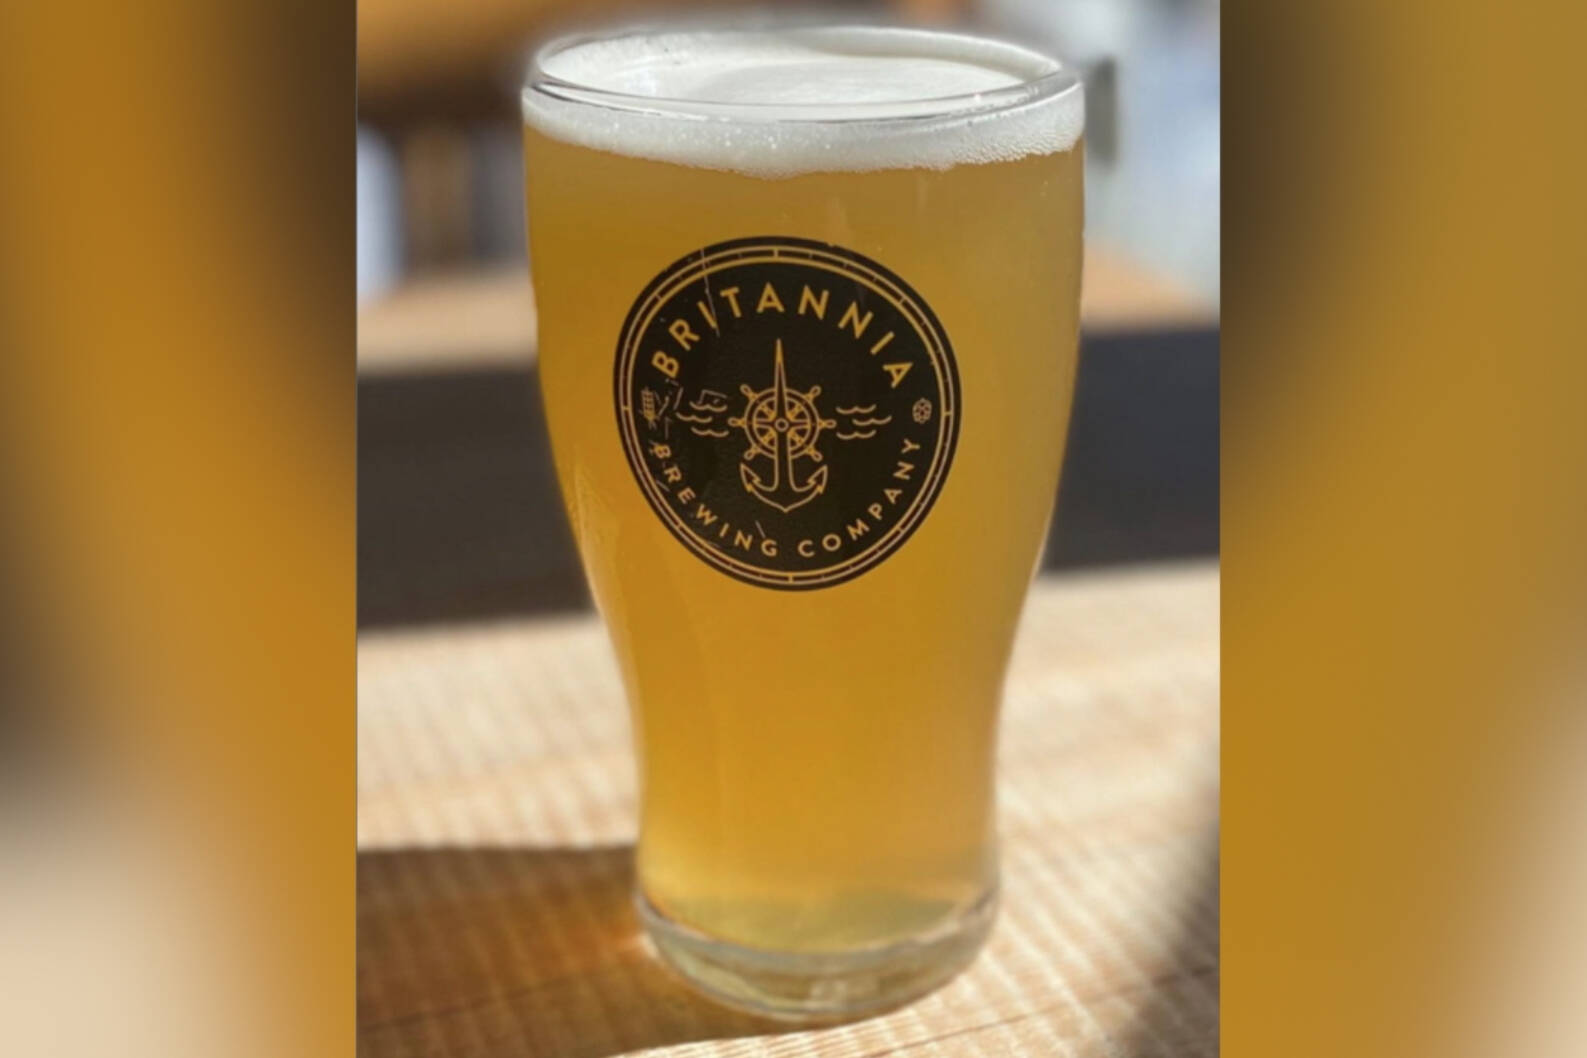 Britannia Brewing Company is expanding to Lake Country in 2023. (@britanniabrewingco/Instagram)